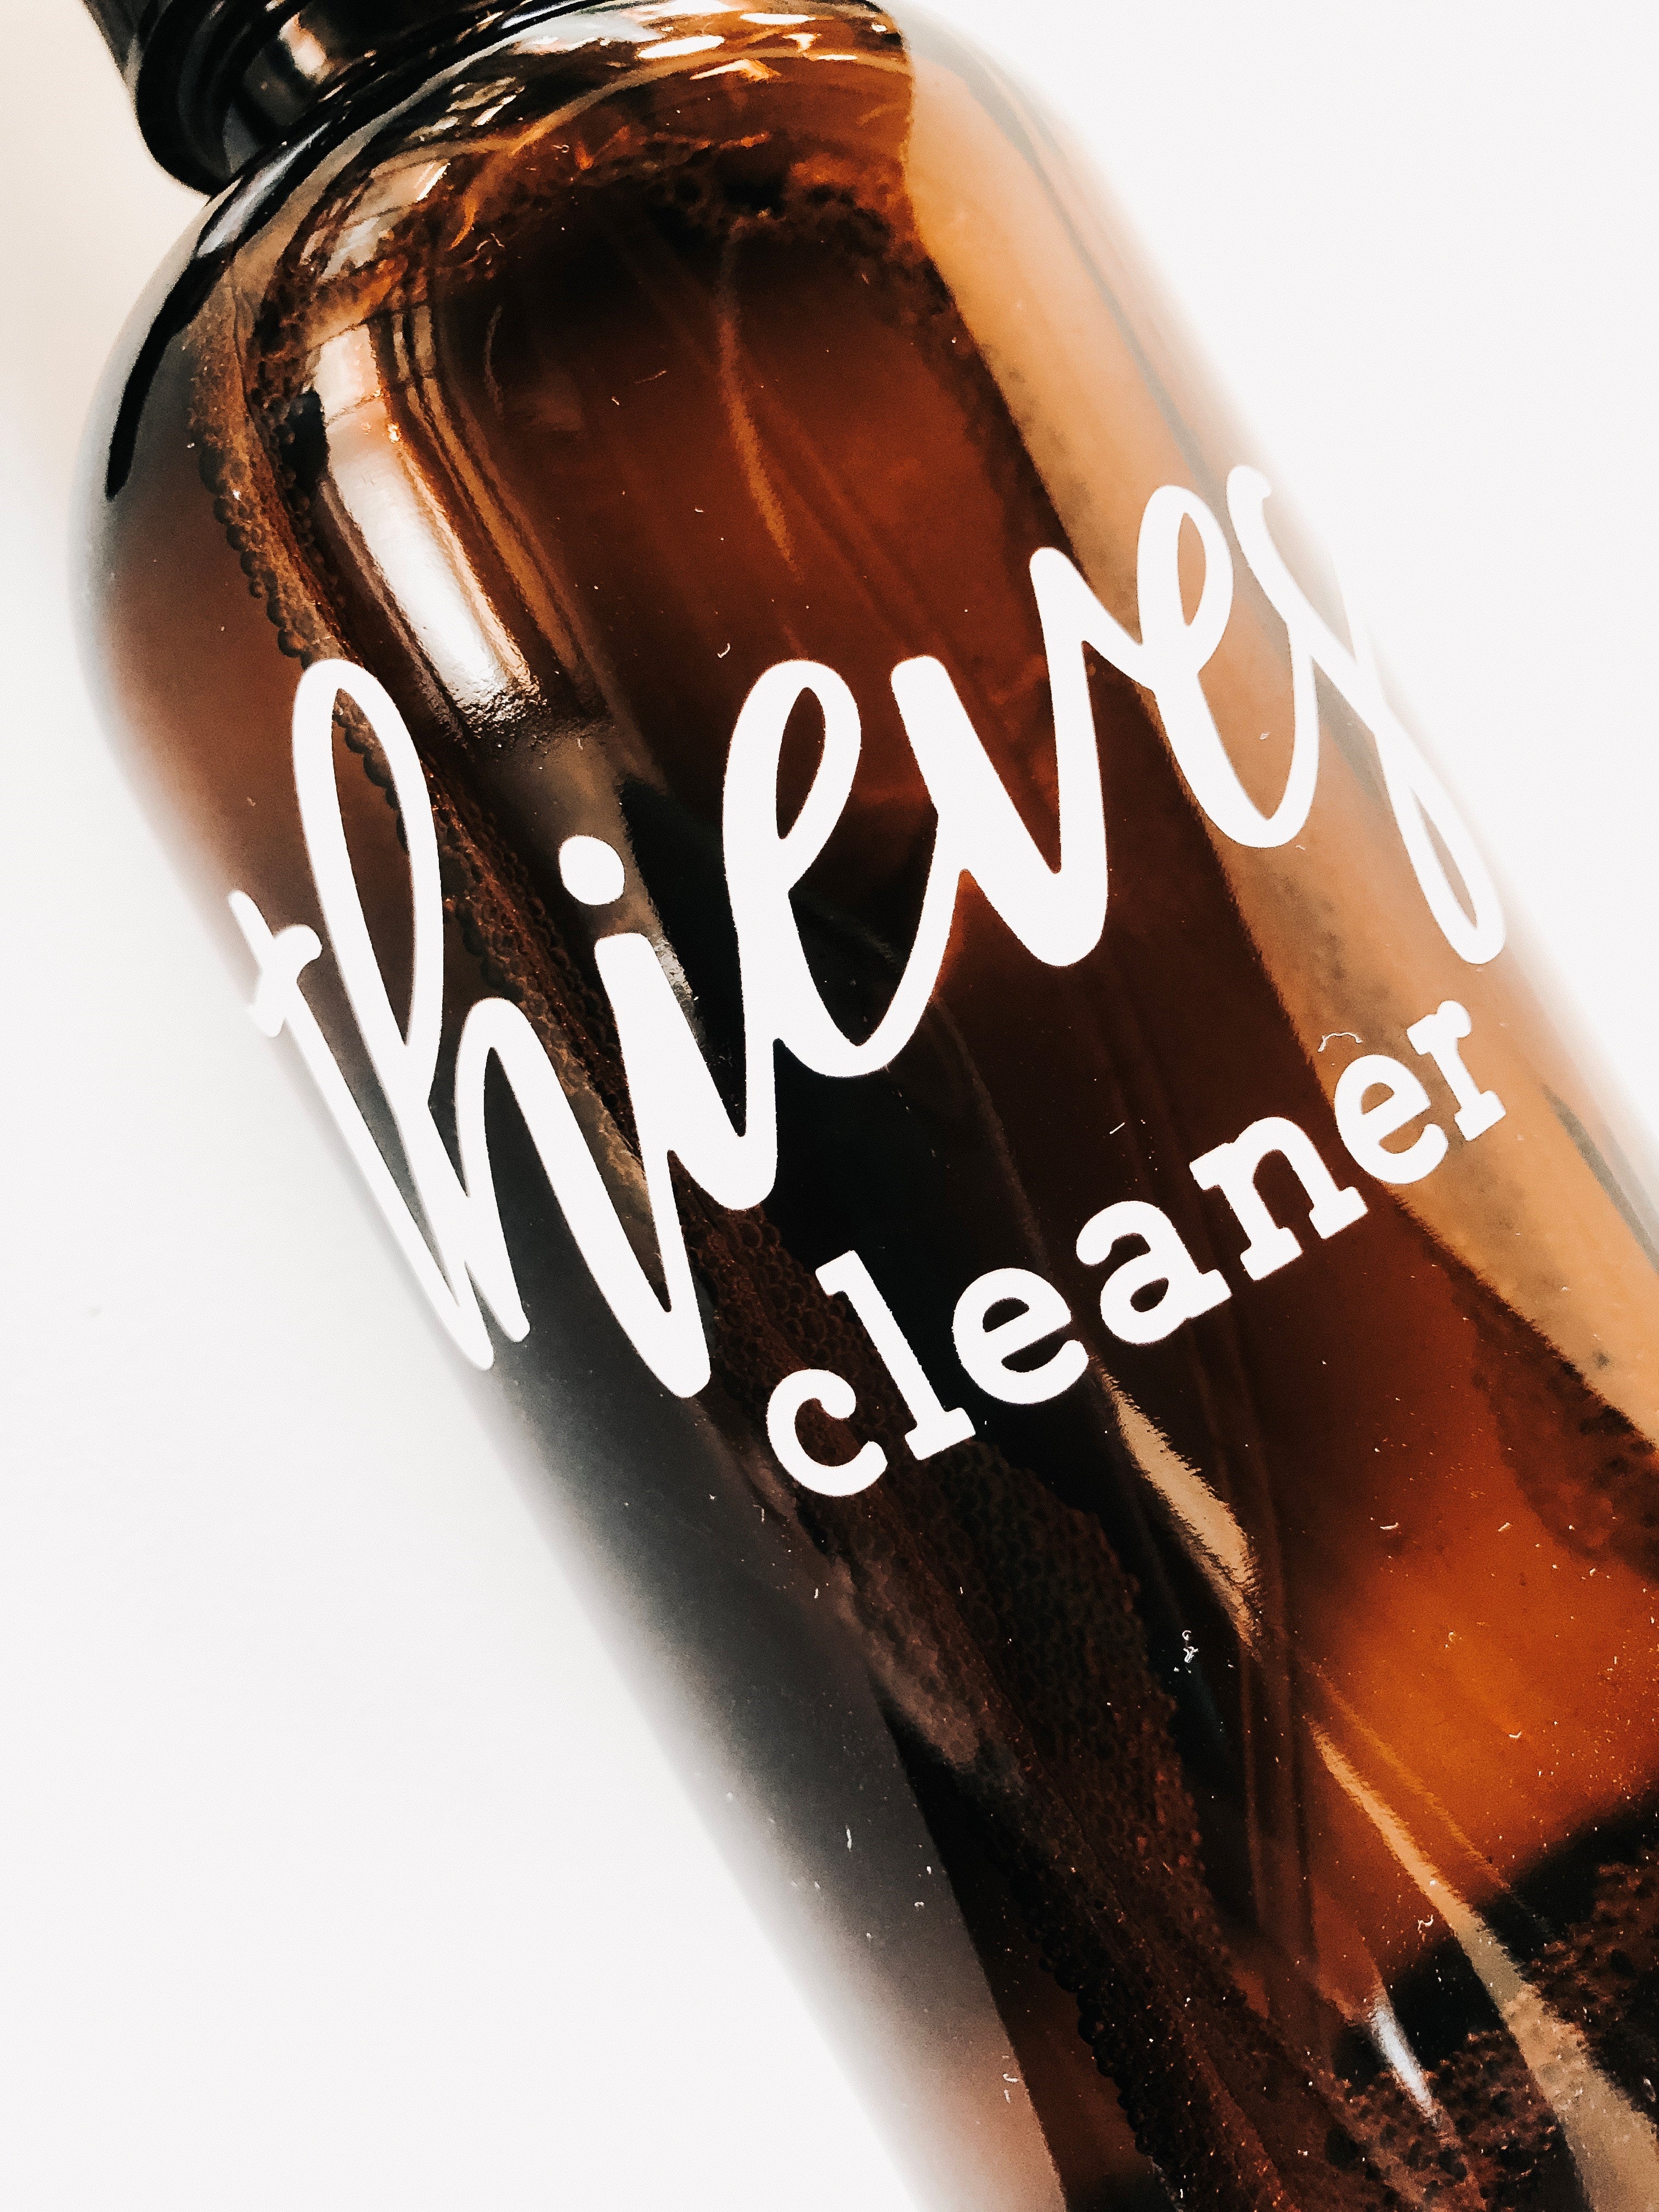 Thieves Cleaner Label